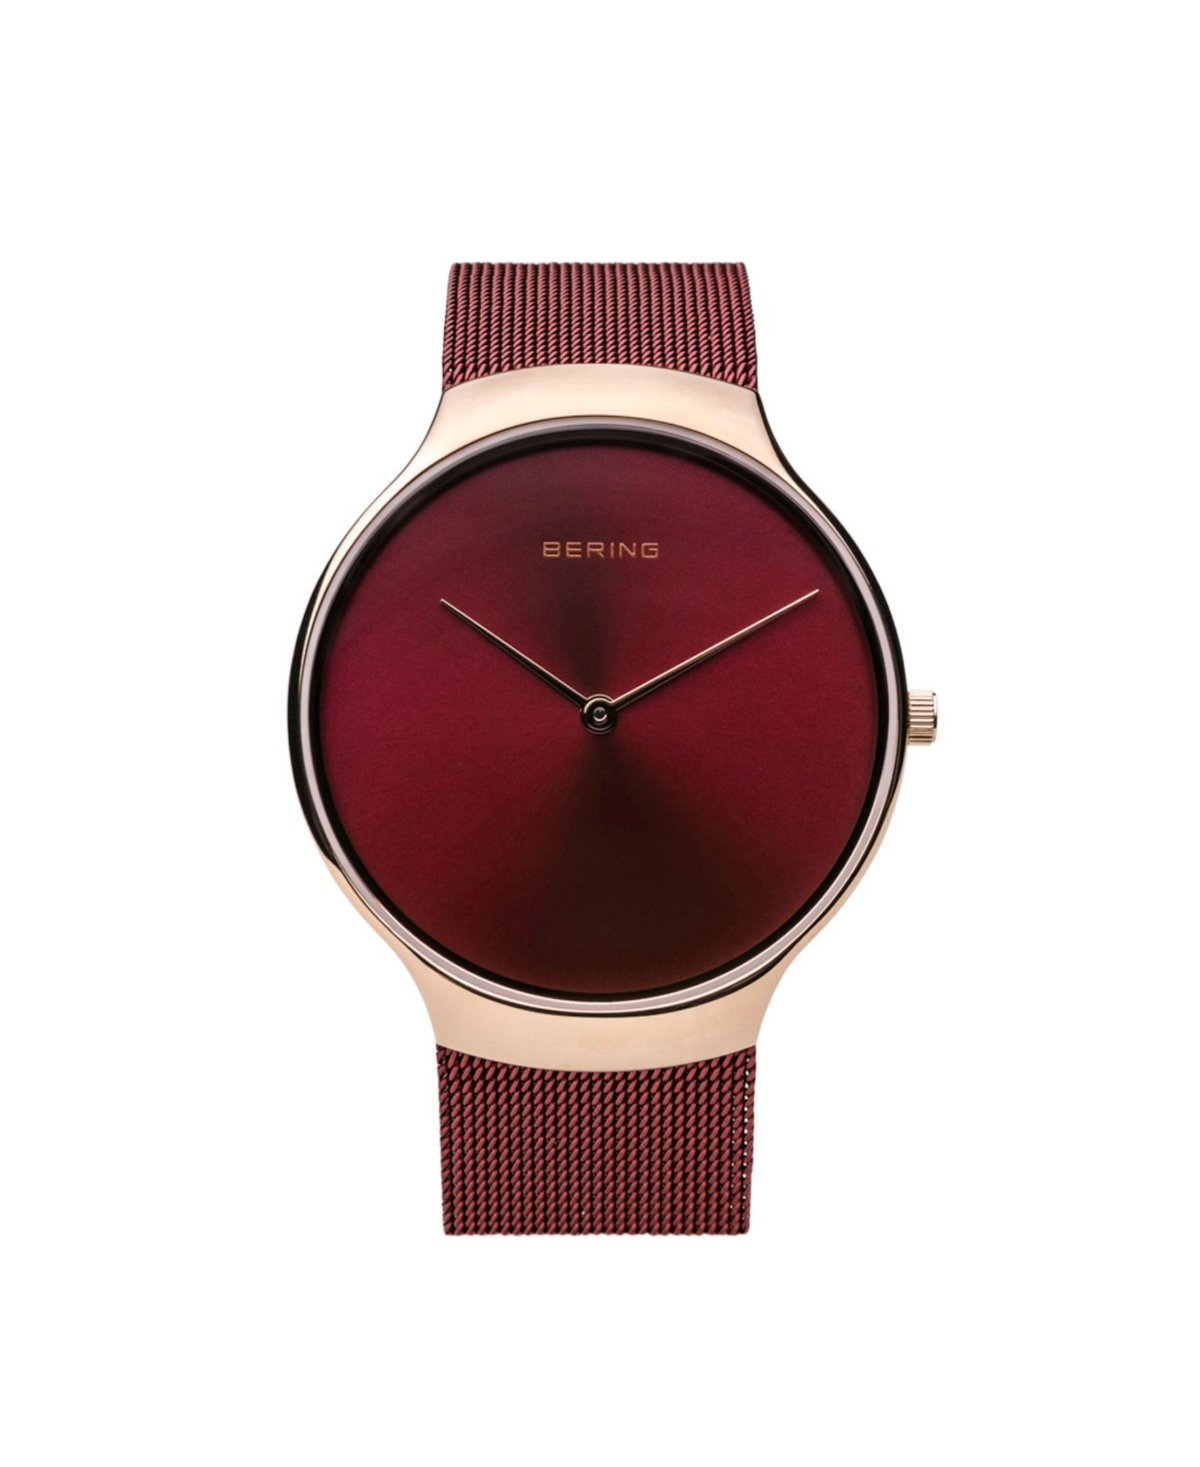 Bering Men's Charity Stainless Steel Case and Mesh Watch